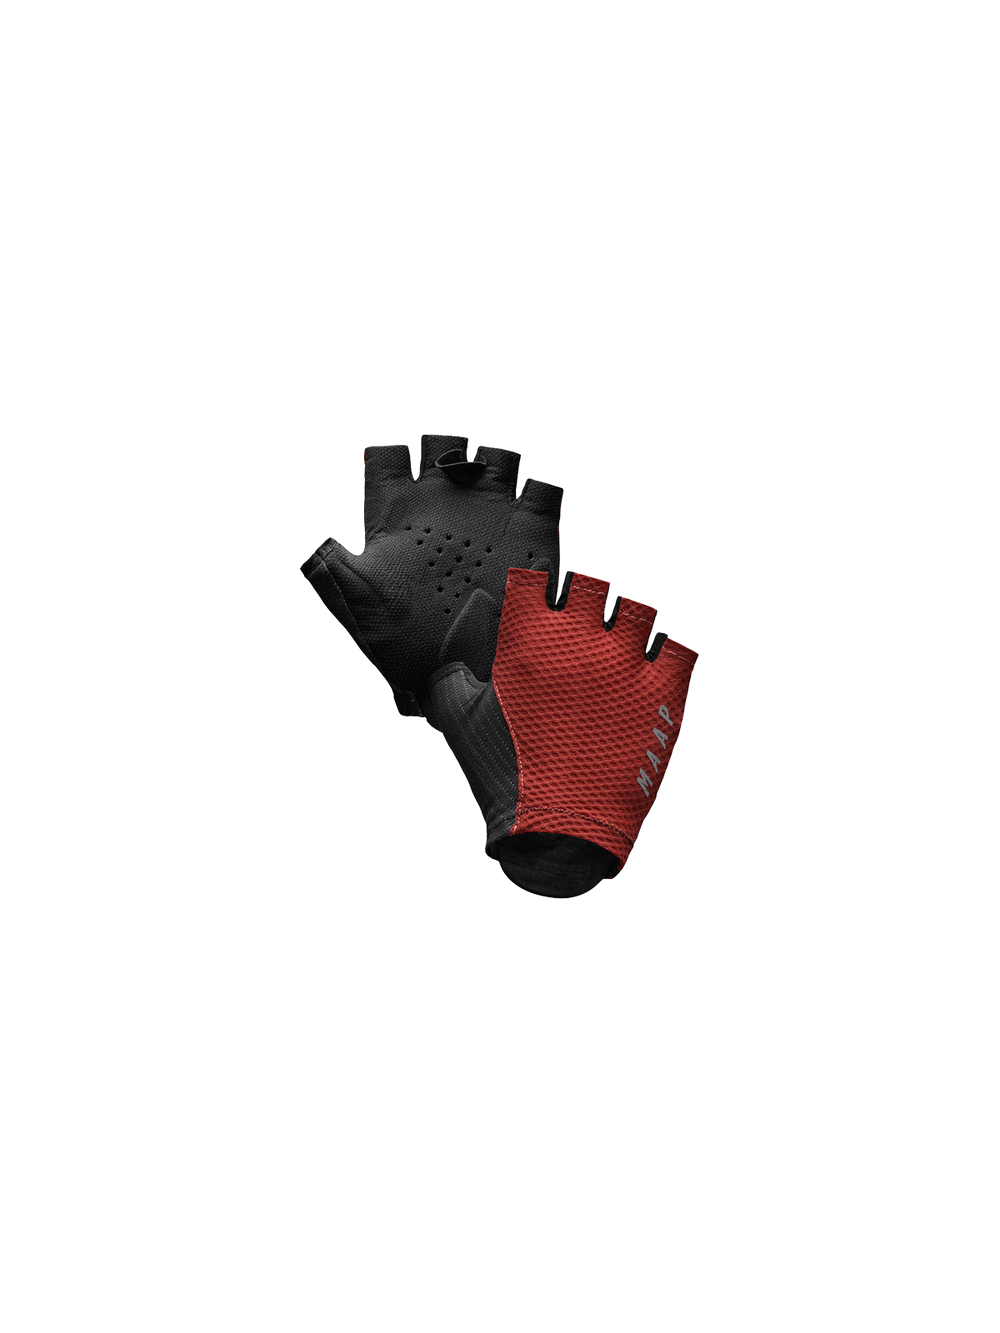 Product Image for Pro Race Mitt